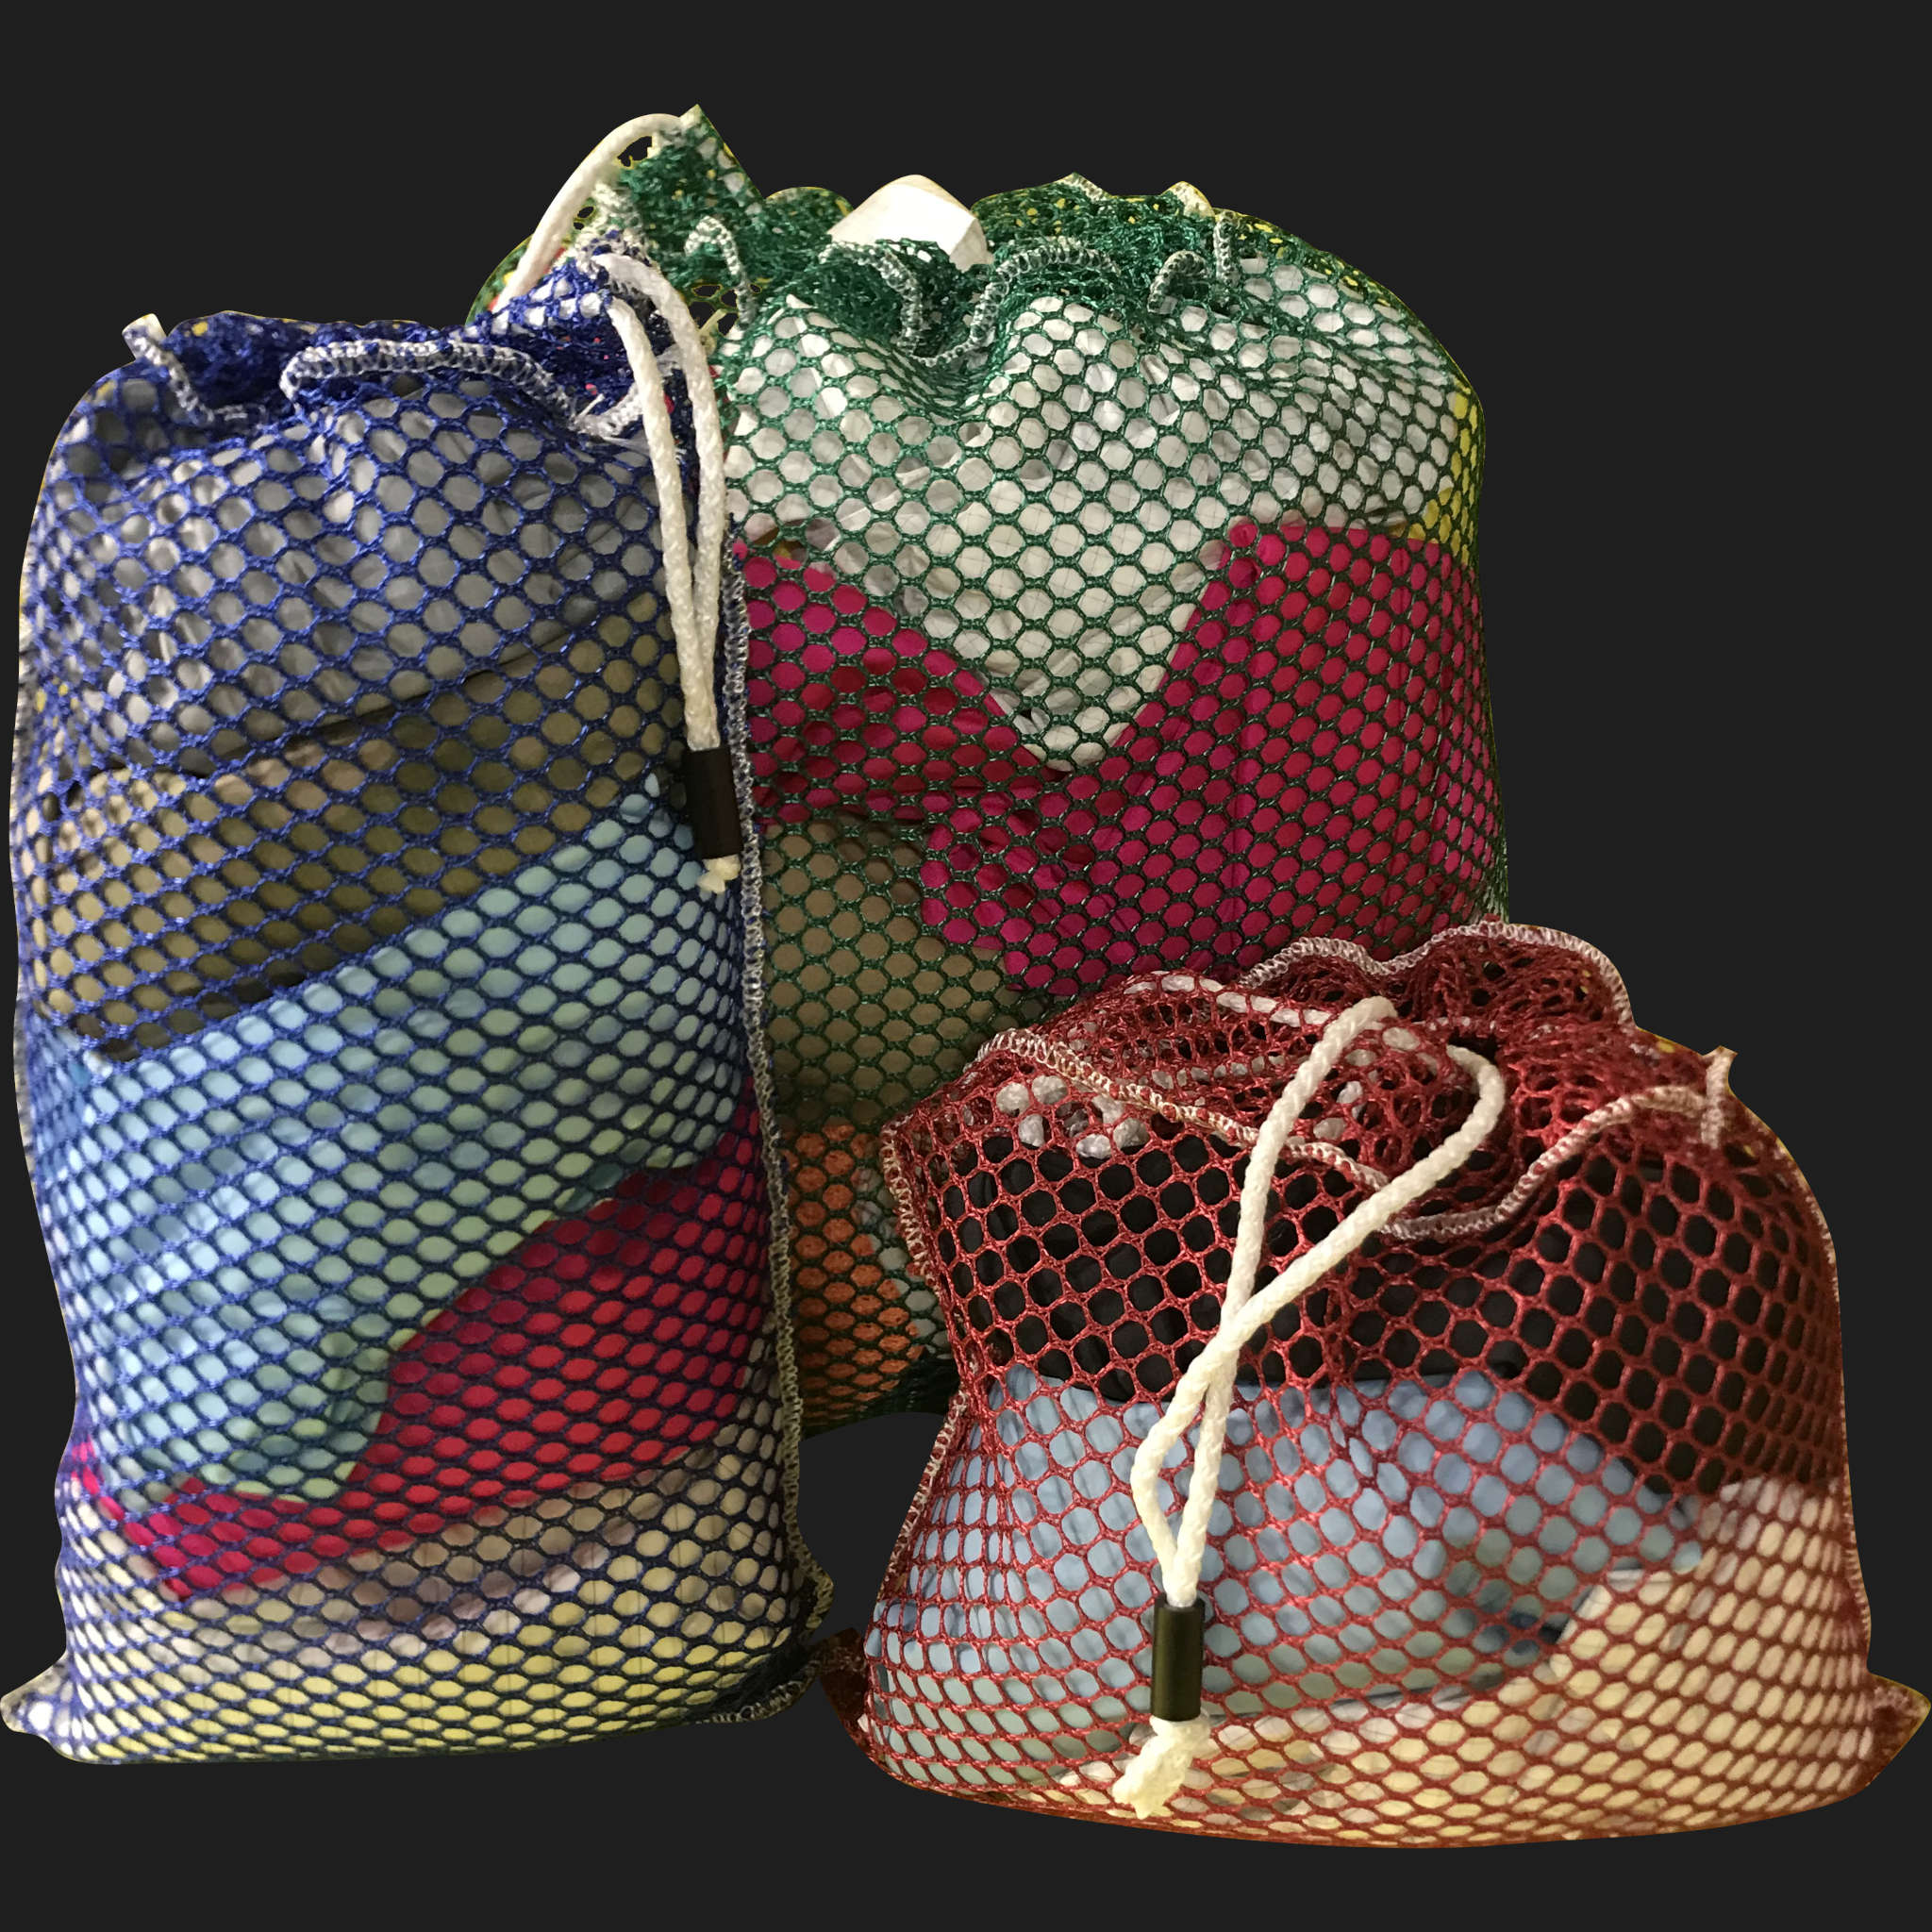 20" x 36" Customized Mesh-Net-Laundry Bags Heavy Duty with Cord and barrellock closure